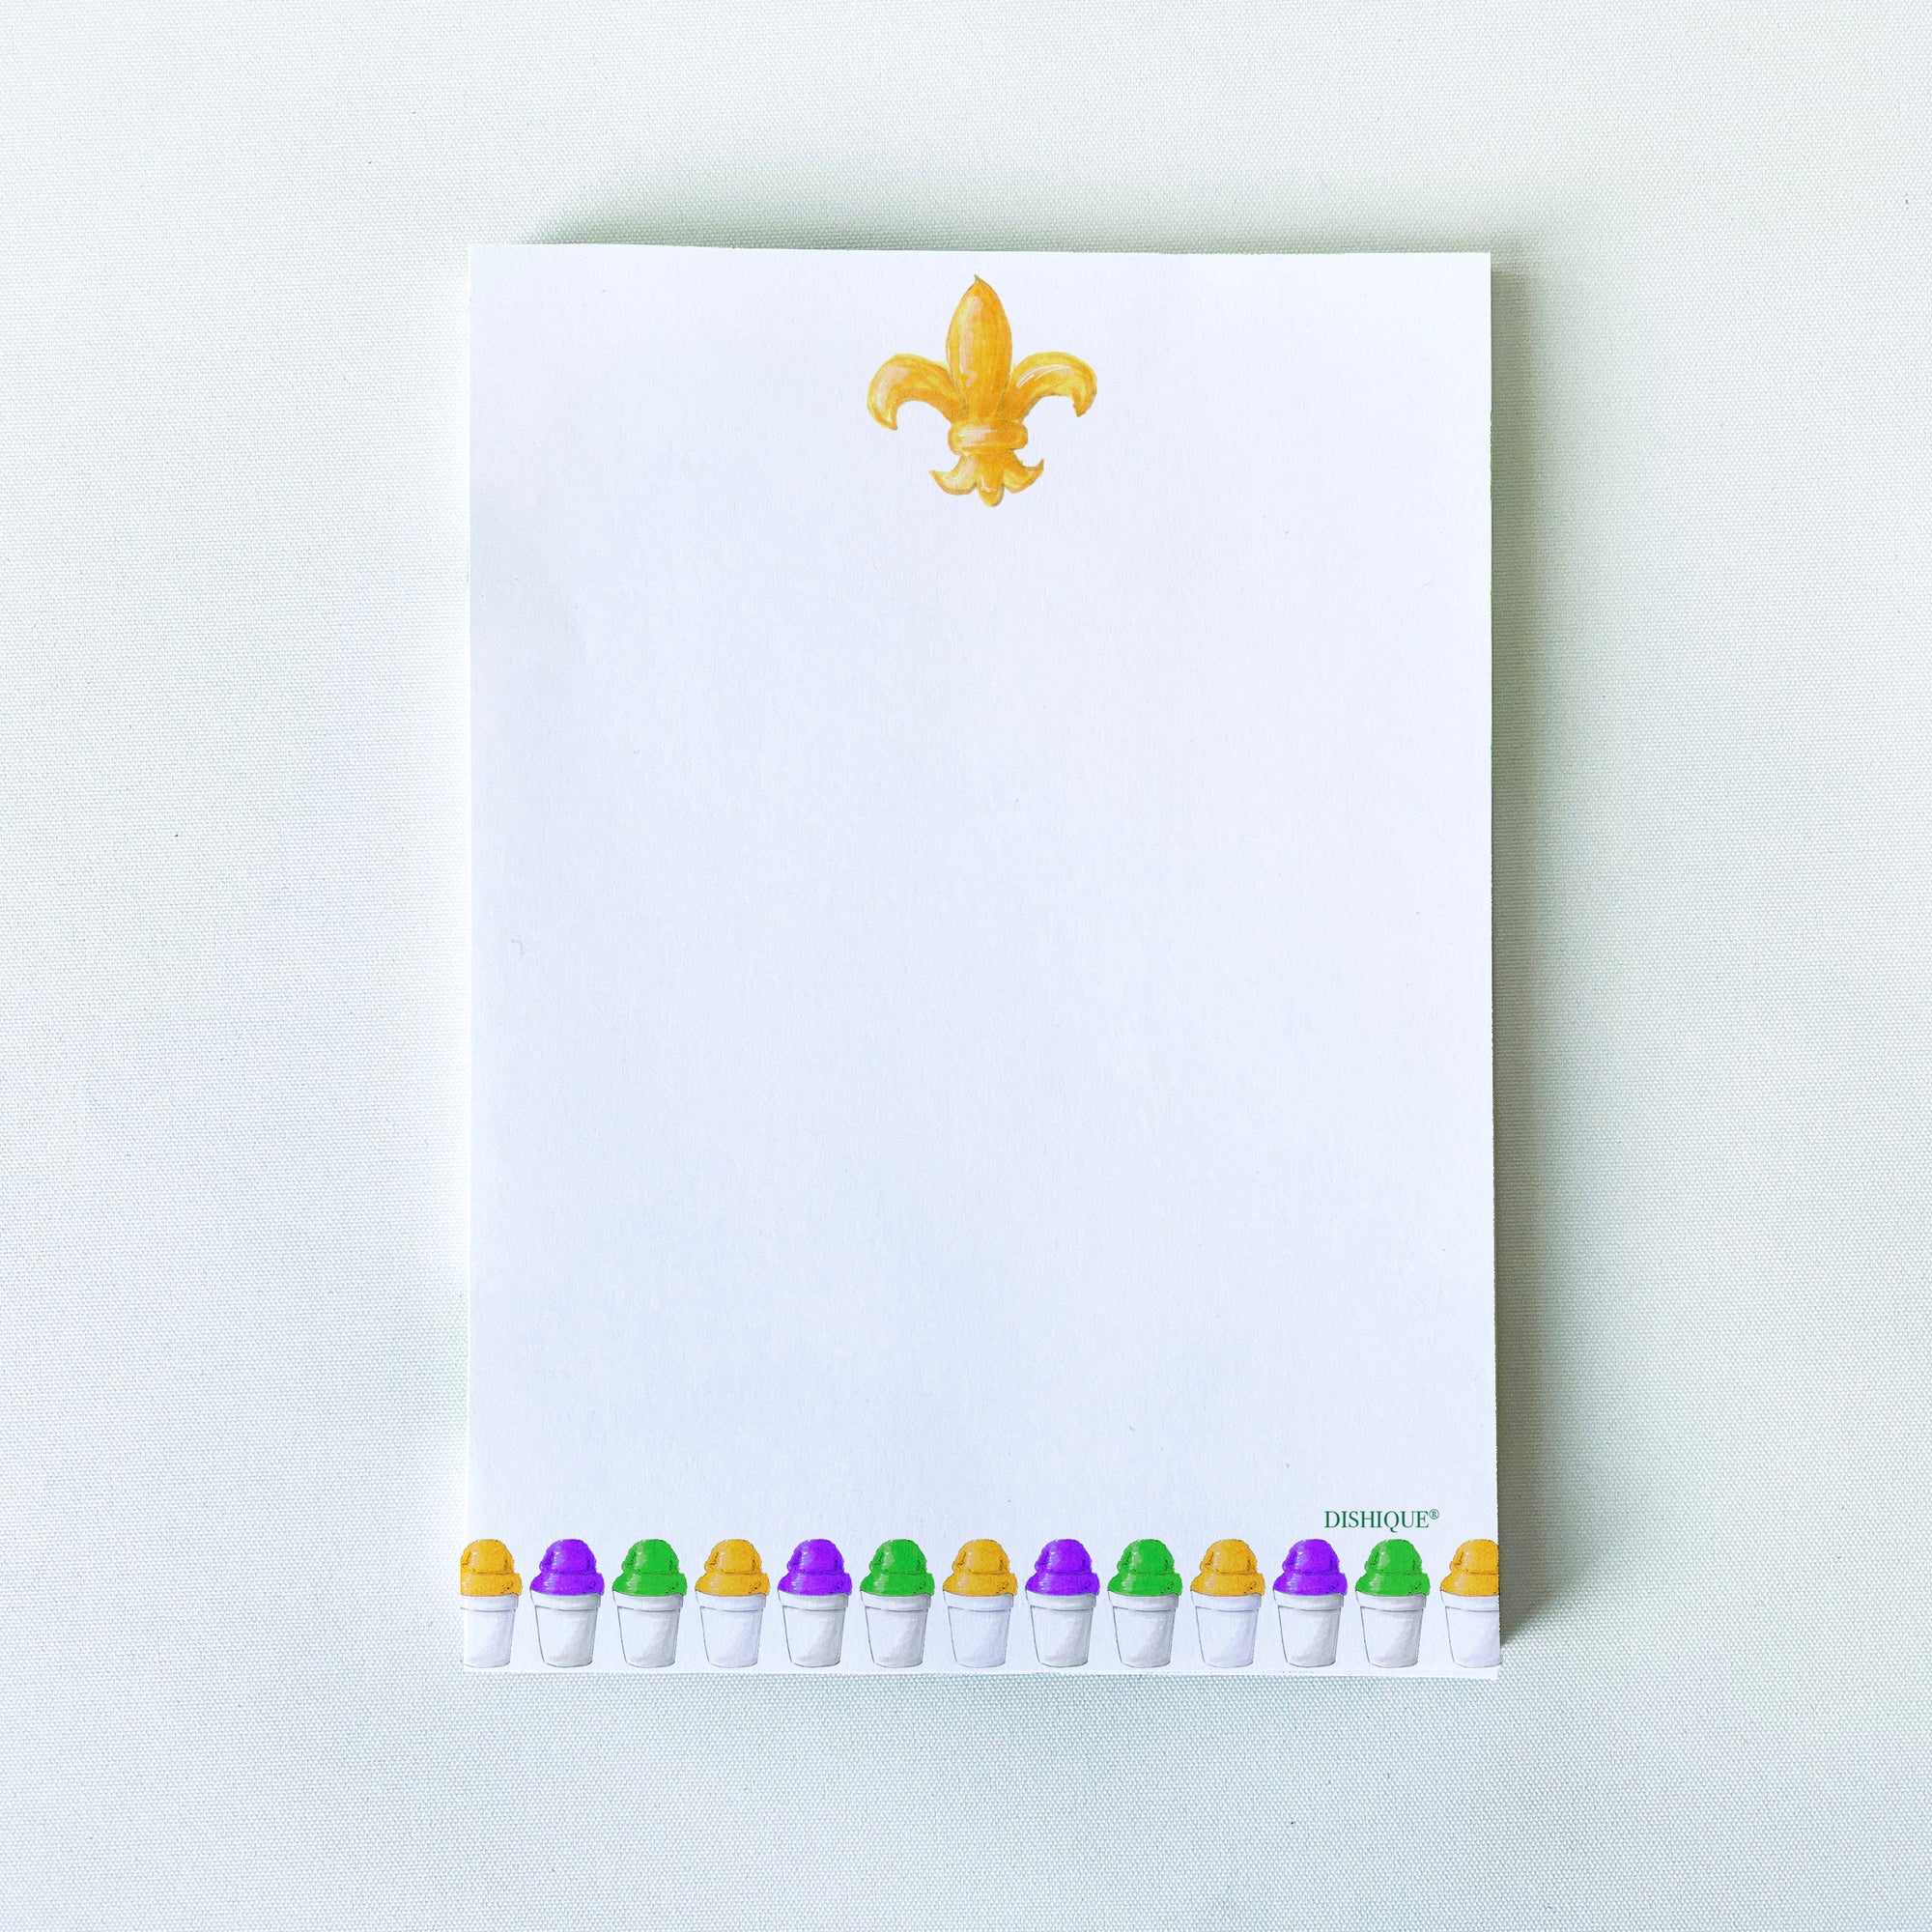 New Orleans Themed Notepad 50 pages